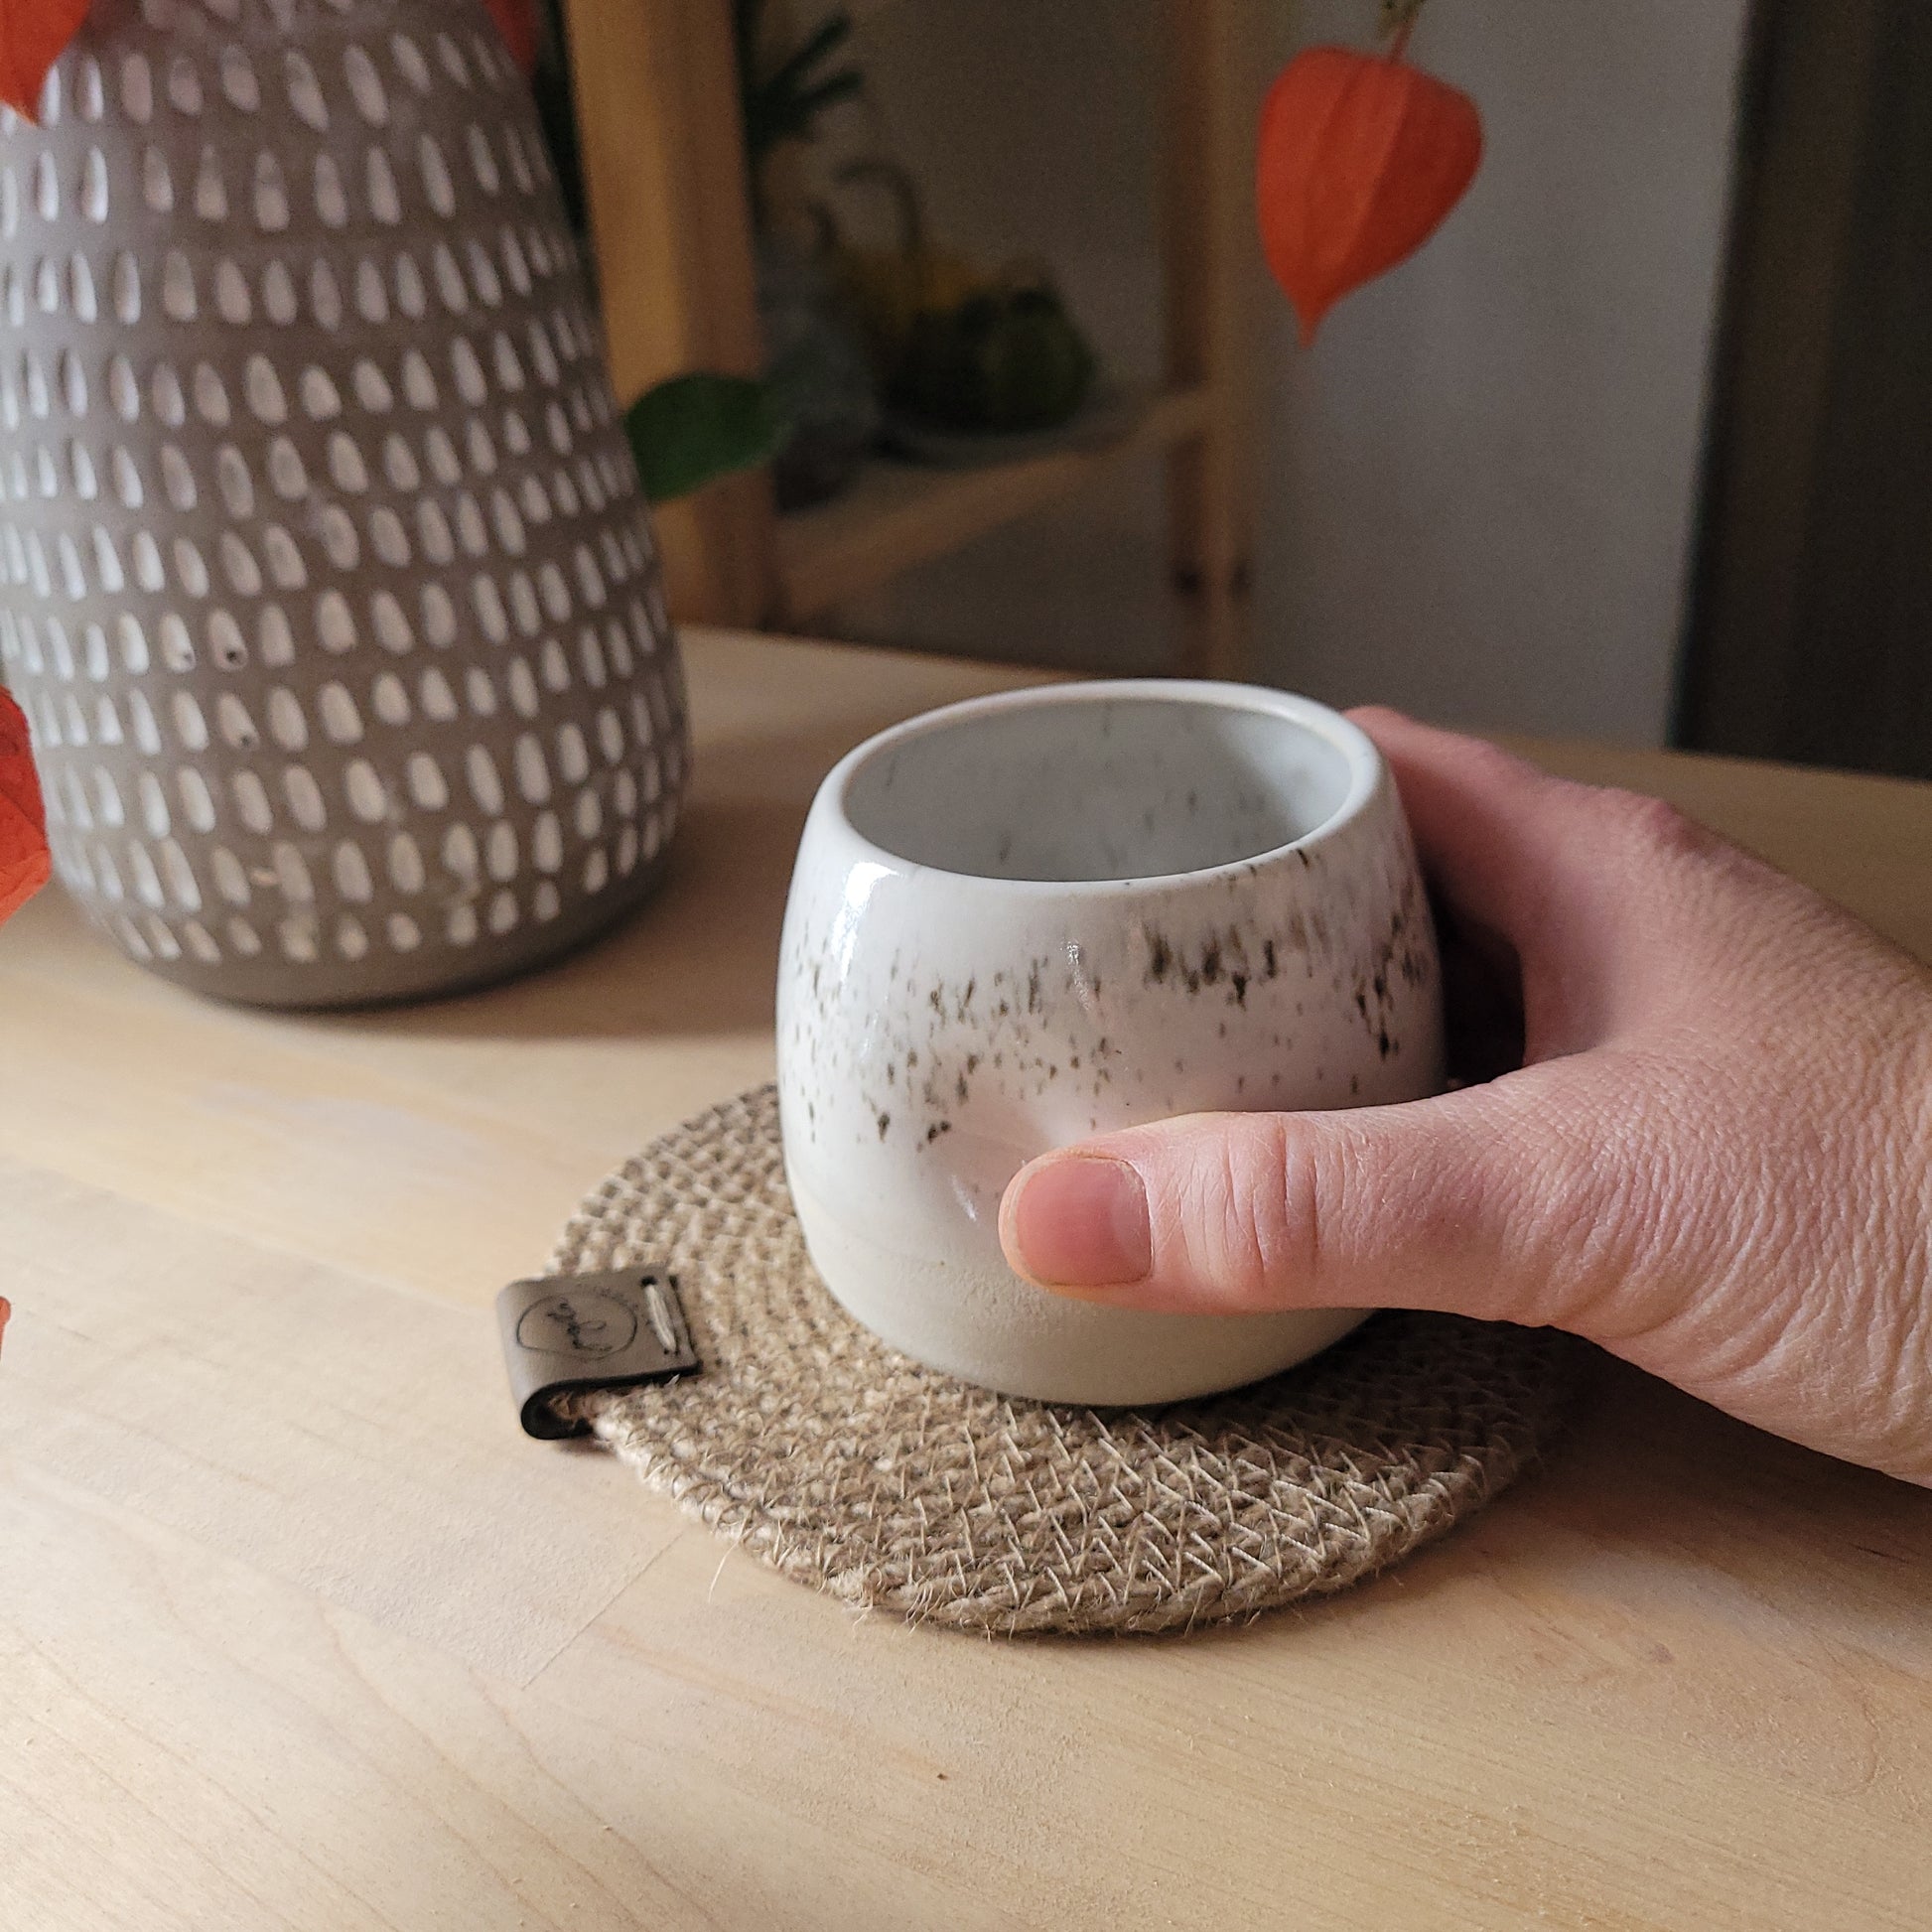 Savor the Beauty of Handmade Ceramics with This Handcrafted Double Espresso Cup and Rustic Jute Coaster